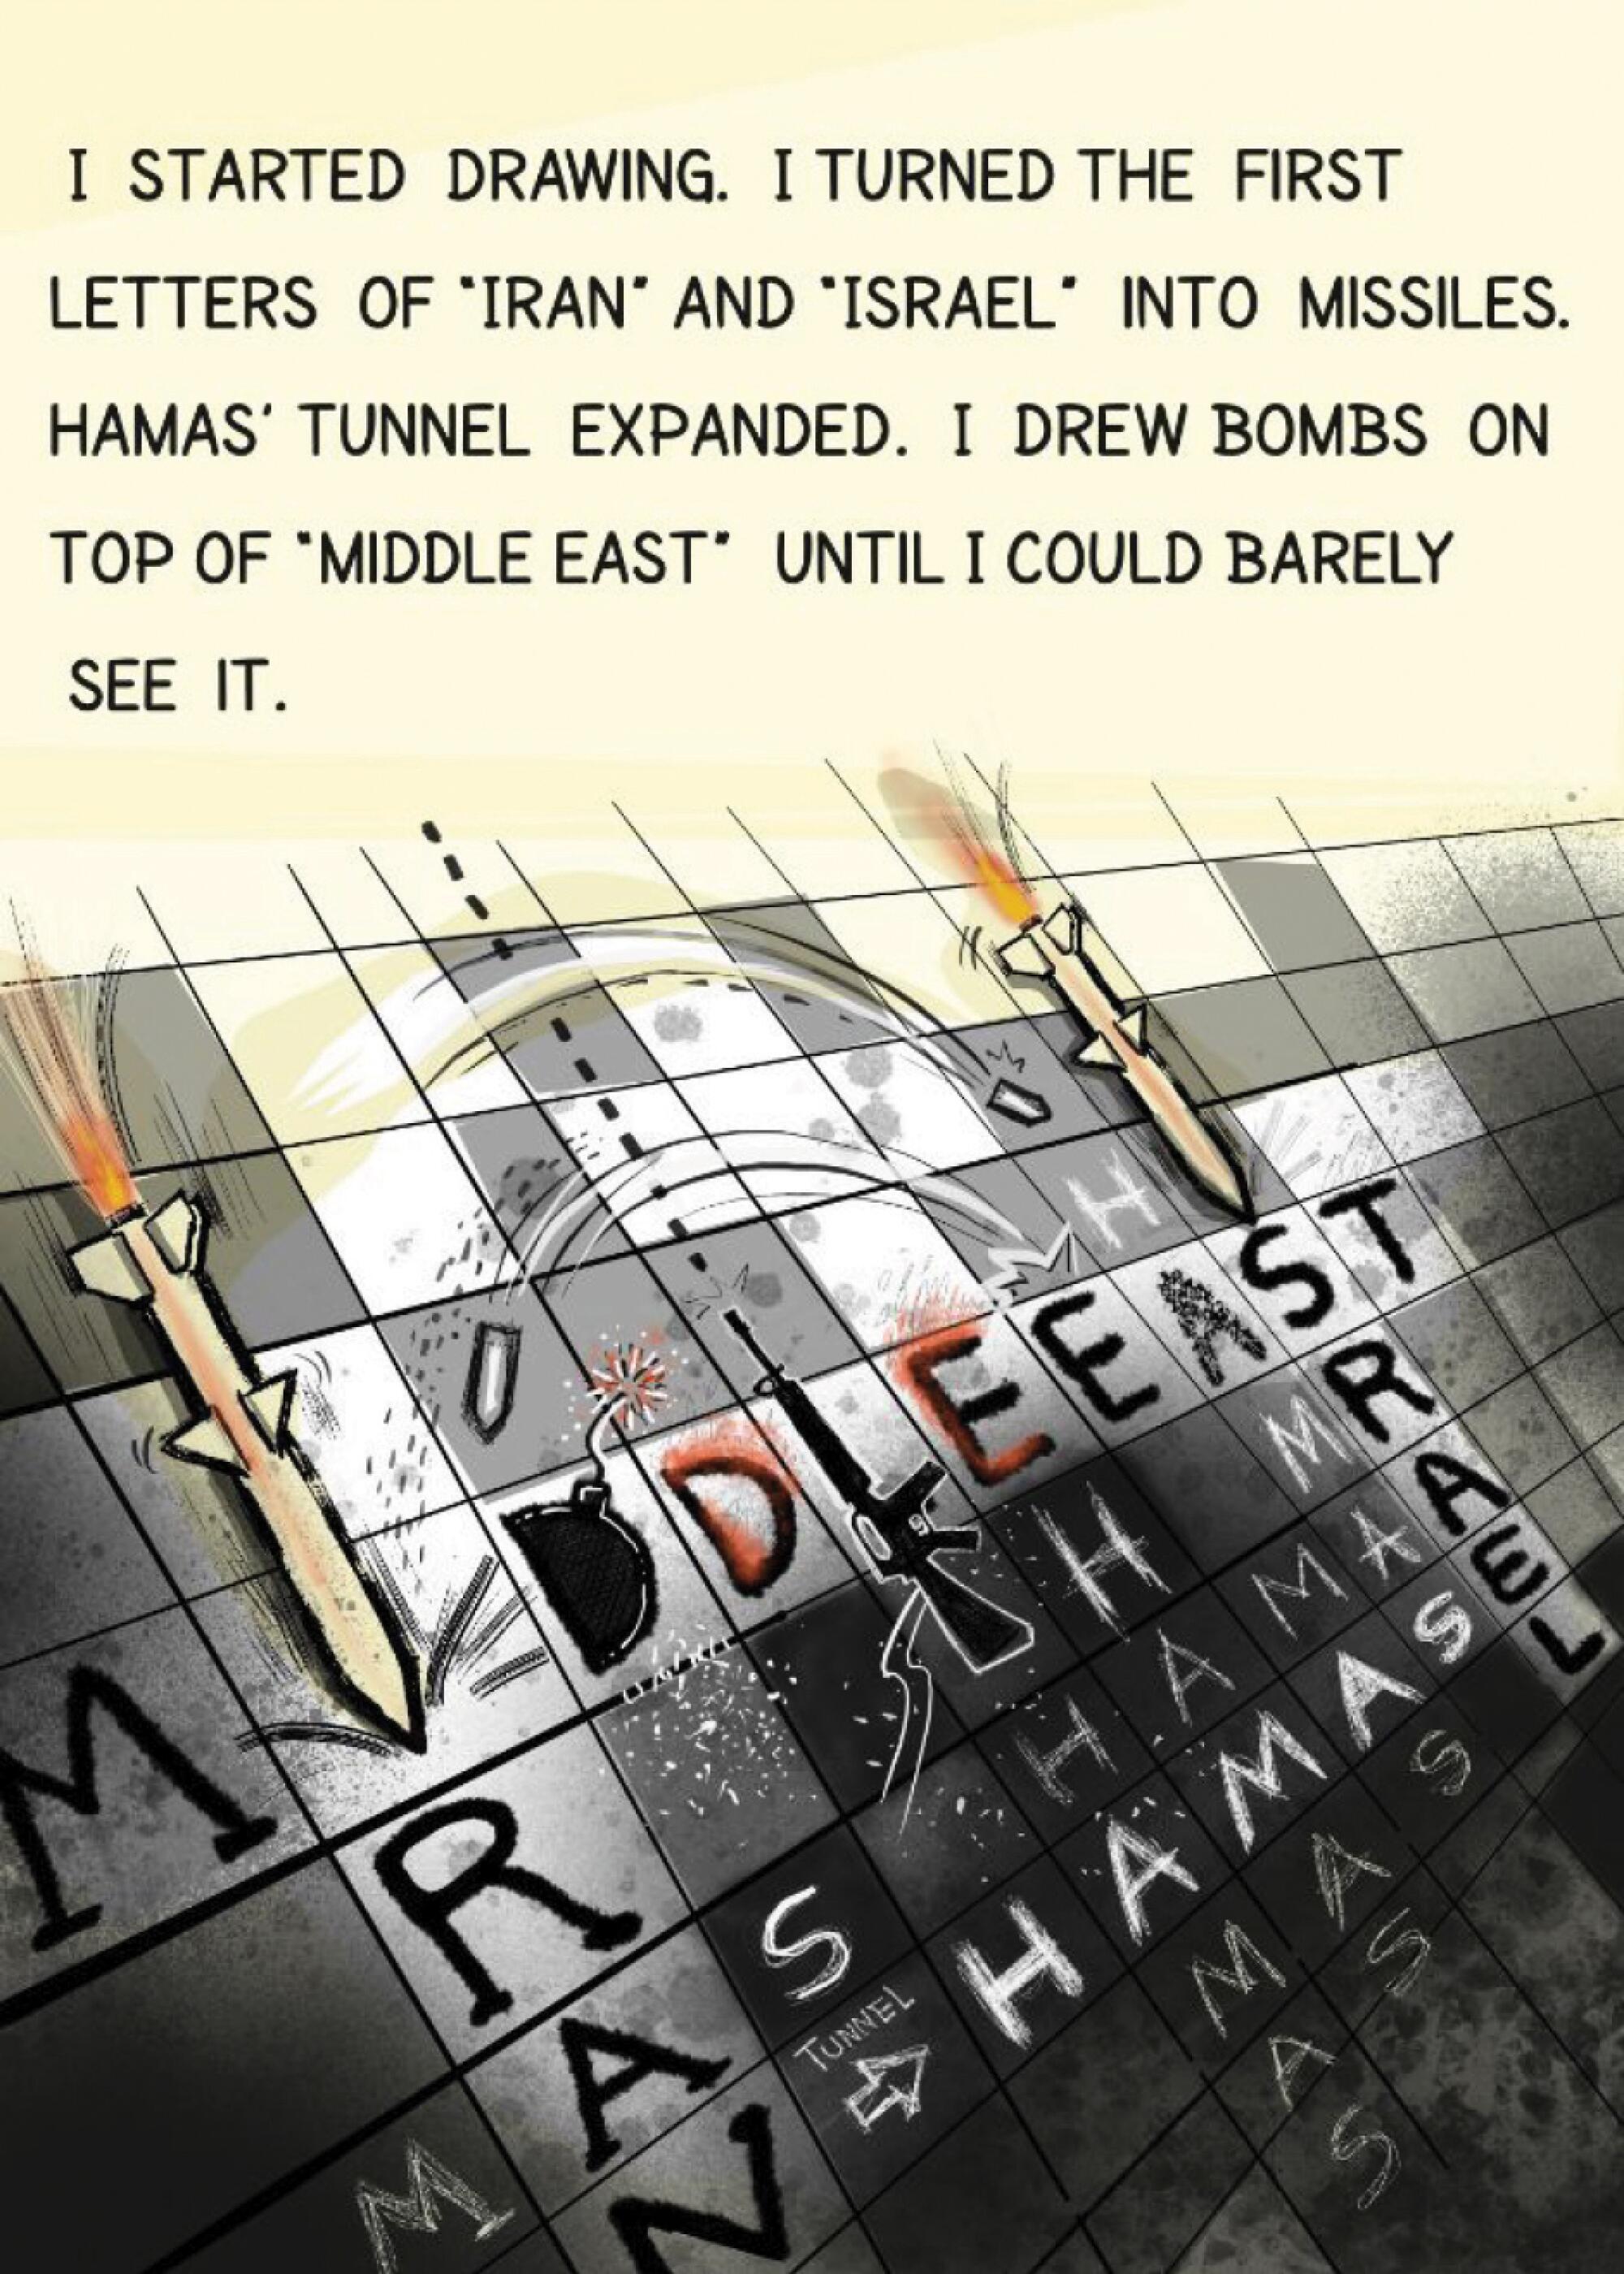 I started drawing the first letters of "Iran" and "Israel" into missiles. Hamas' tunnel expanded. Bombs above "Middle East." 